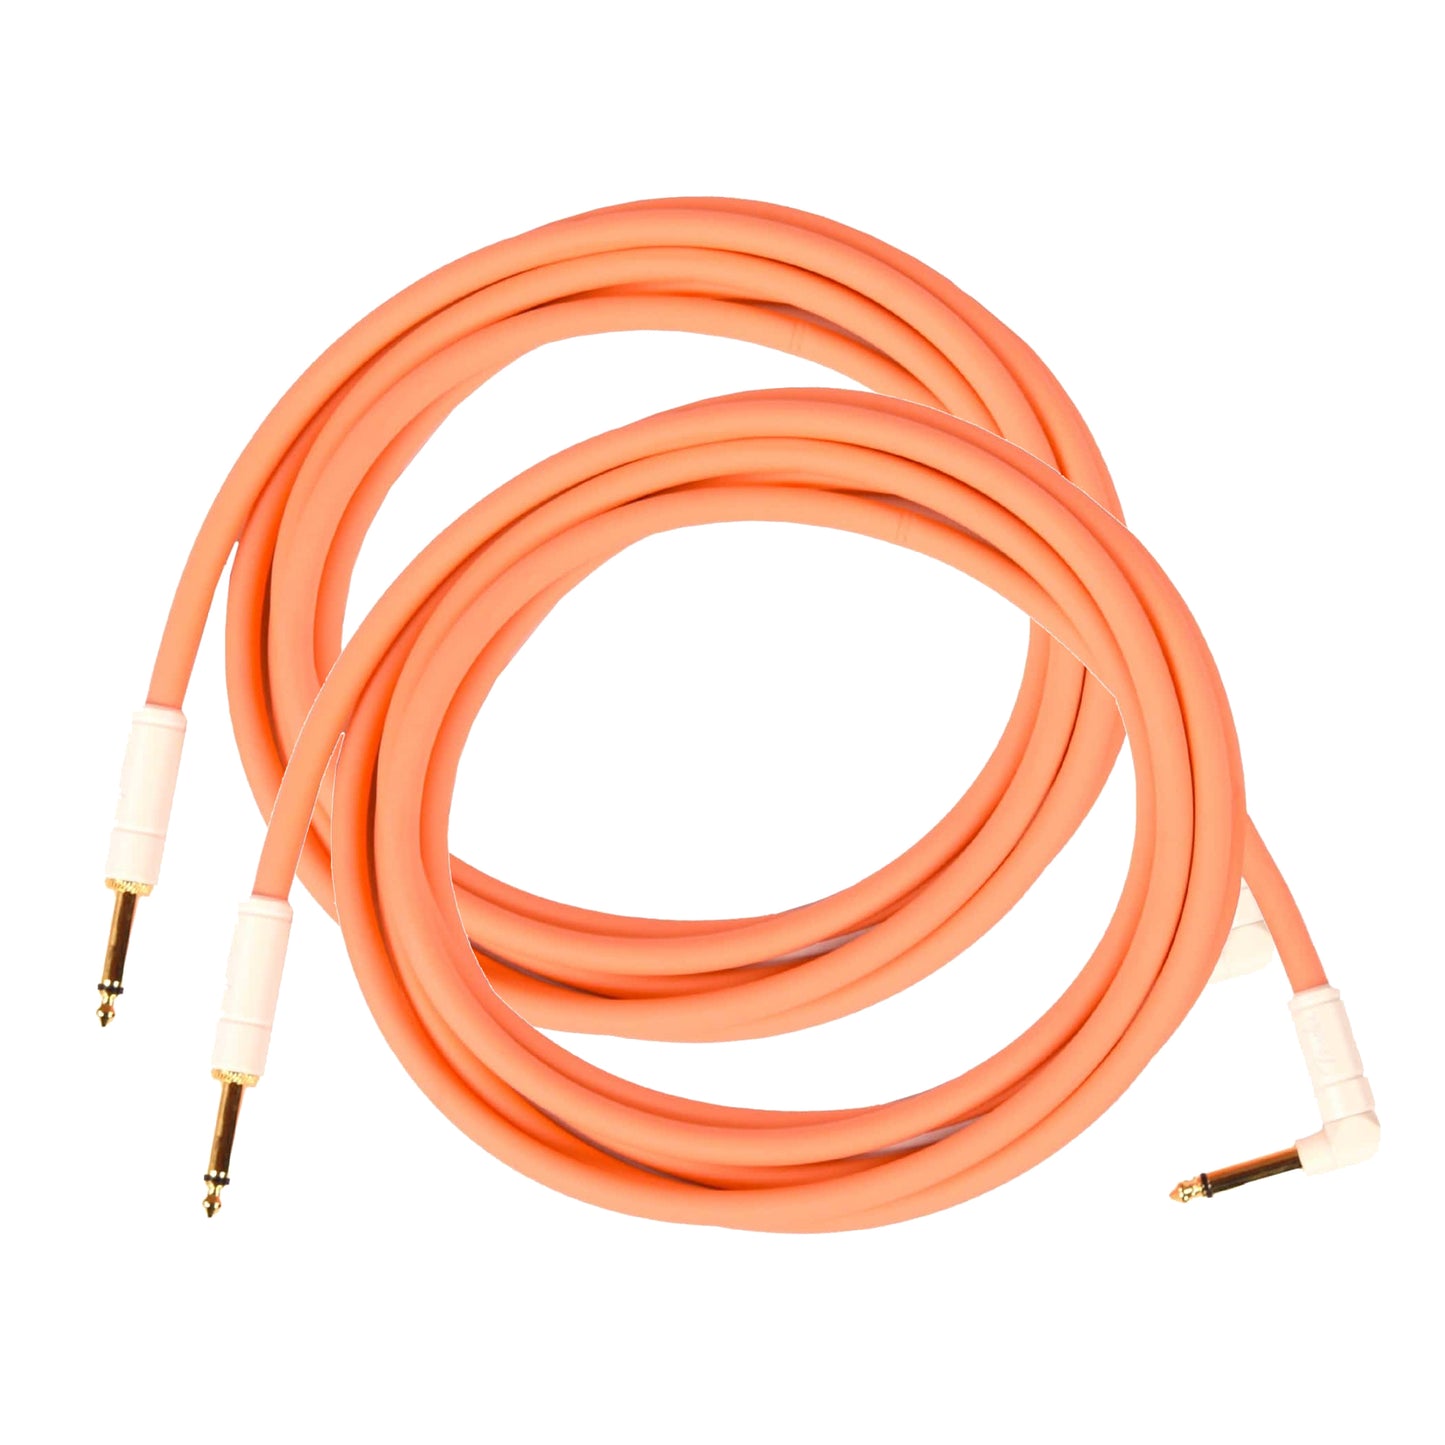 Fender Deluxe Instrument Cable Pacific Peach 10' Angle-Straight 2 Pack Bundle